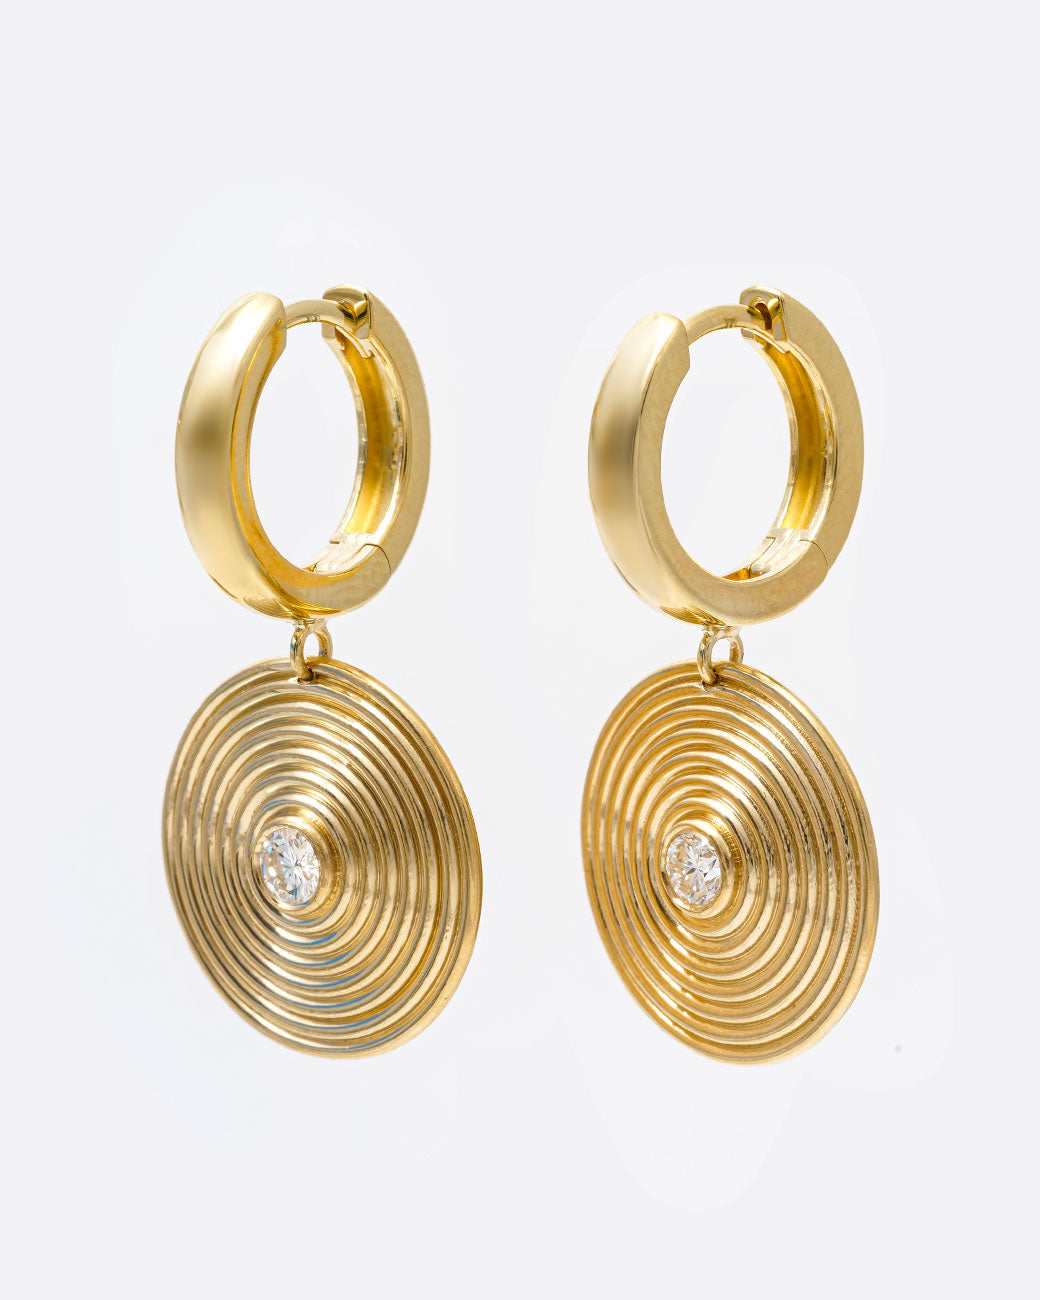 14k yellow gold hoop earrings with round ribbed diamond drops by Selin Kent, shown from the side.